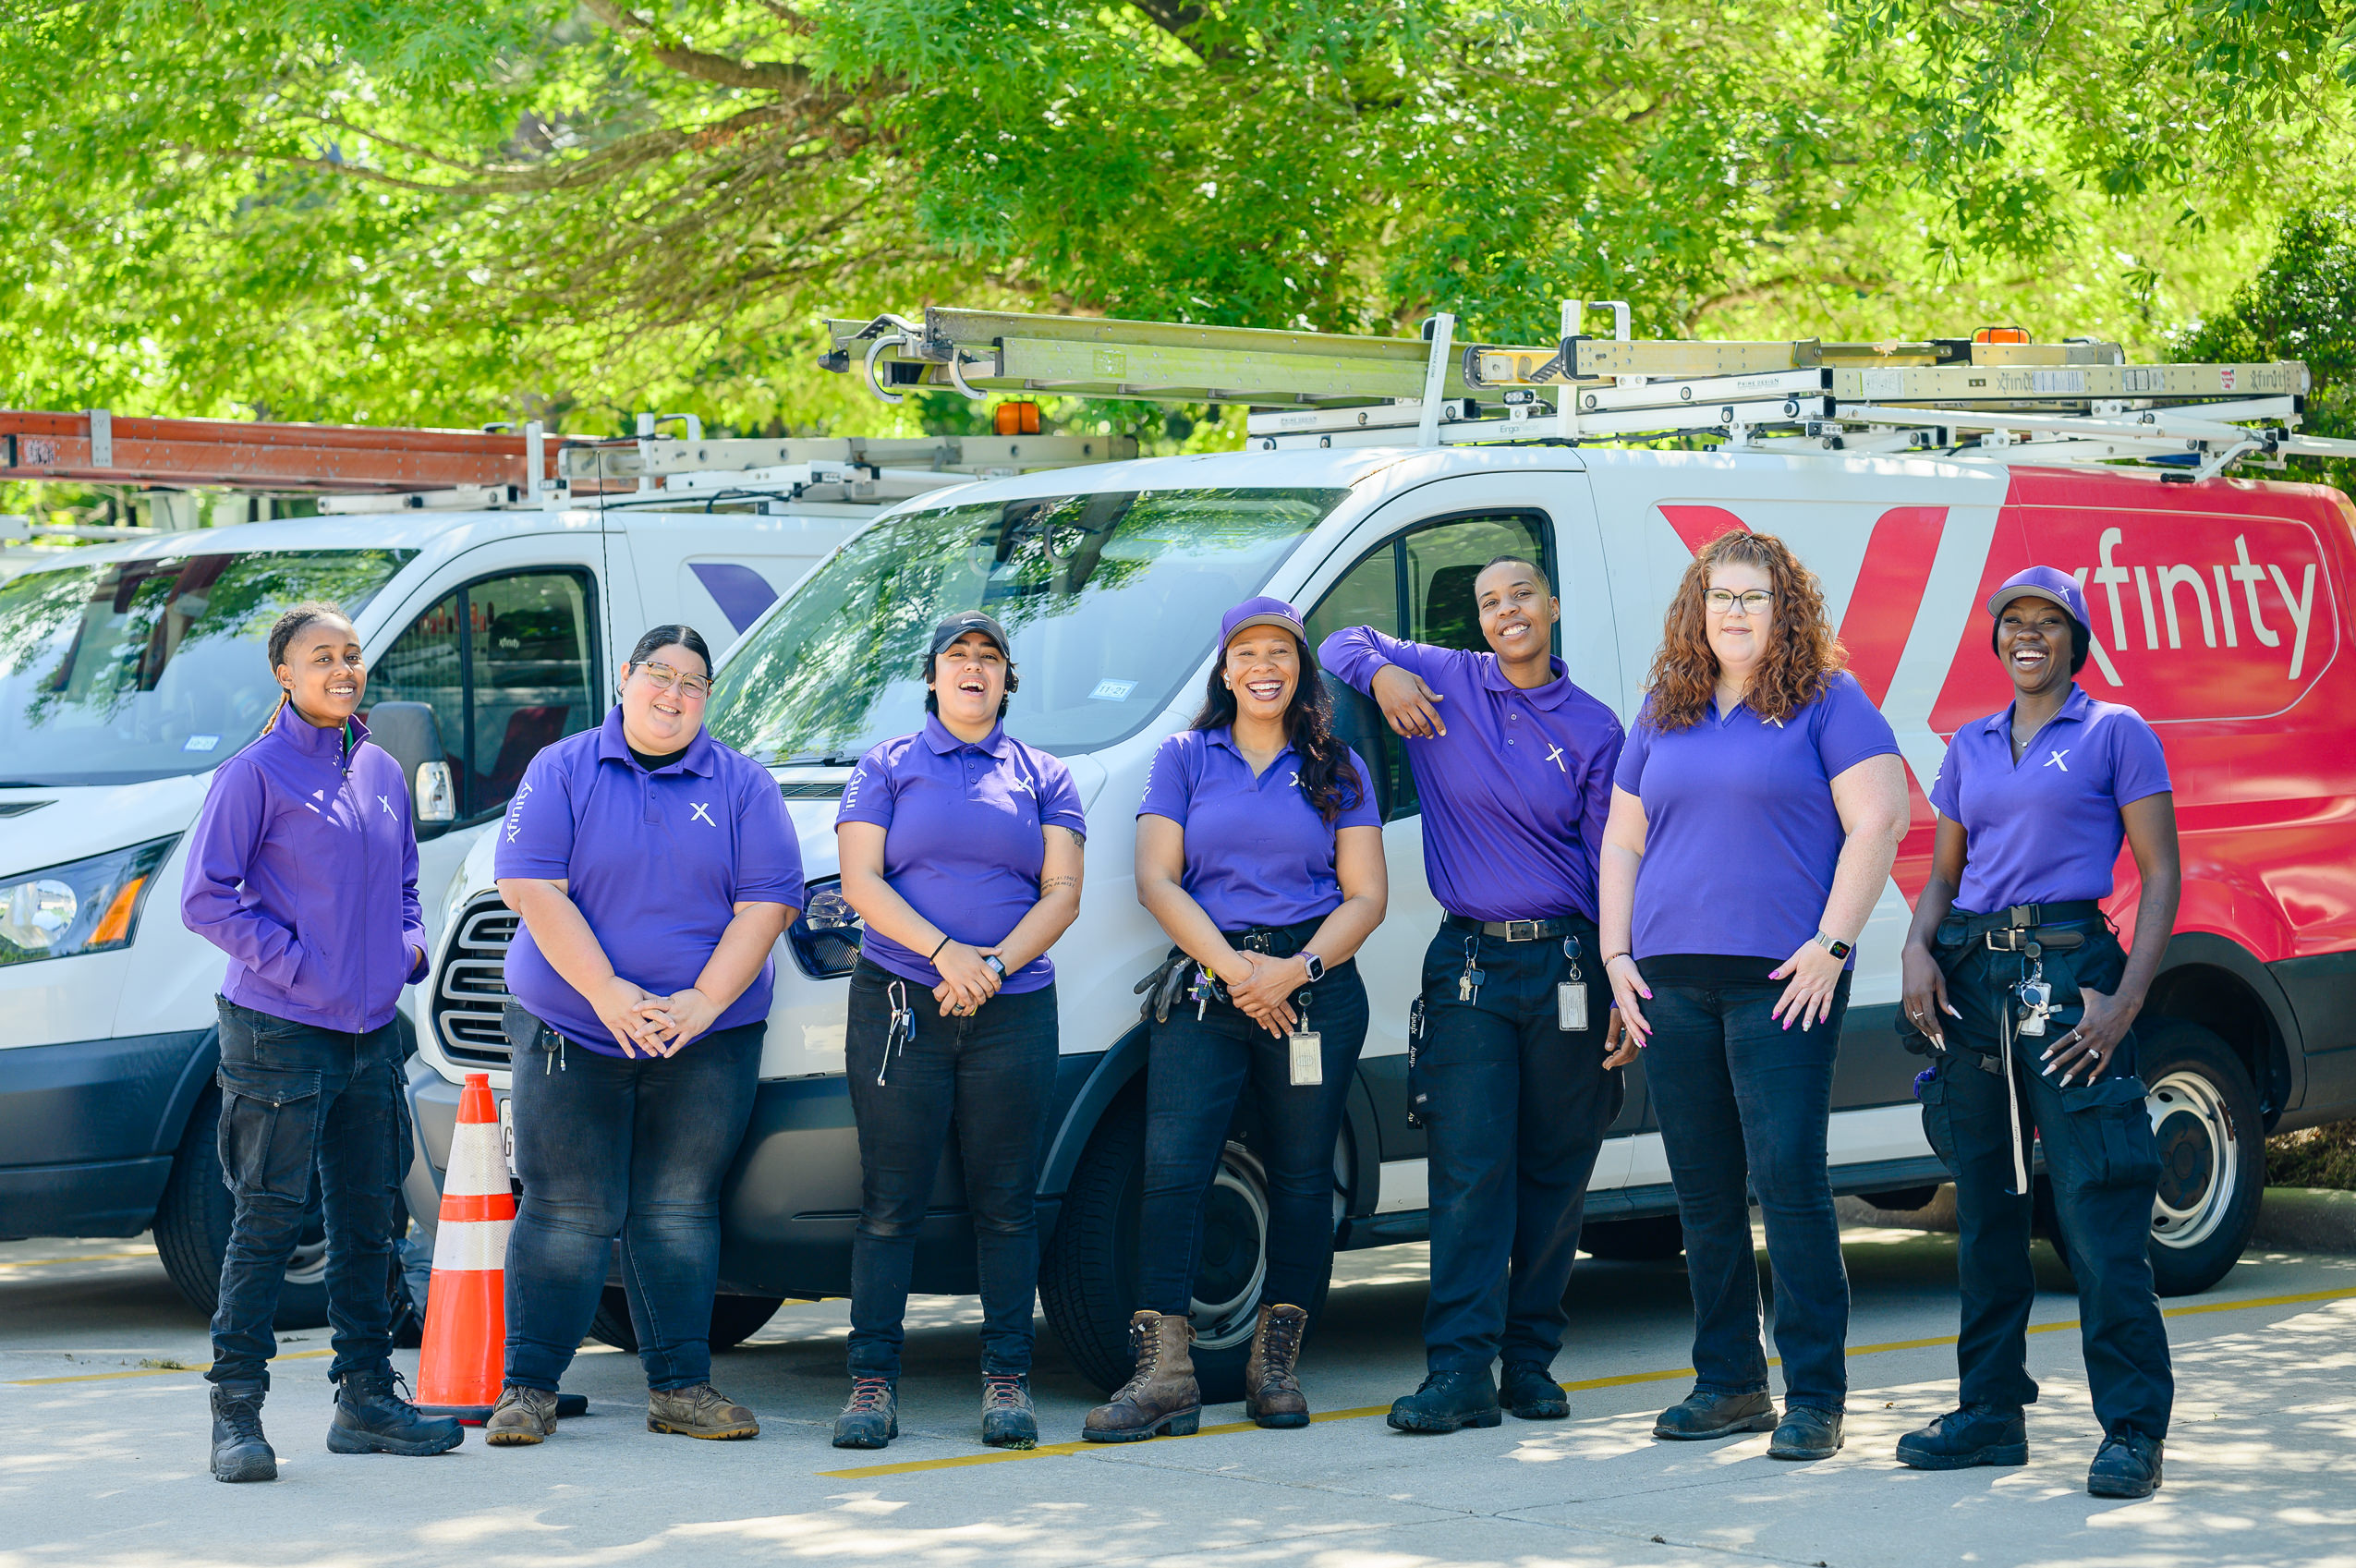 A group of Xfinity technicians gather for a photo in The Woodlands, Texas.